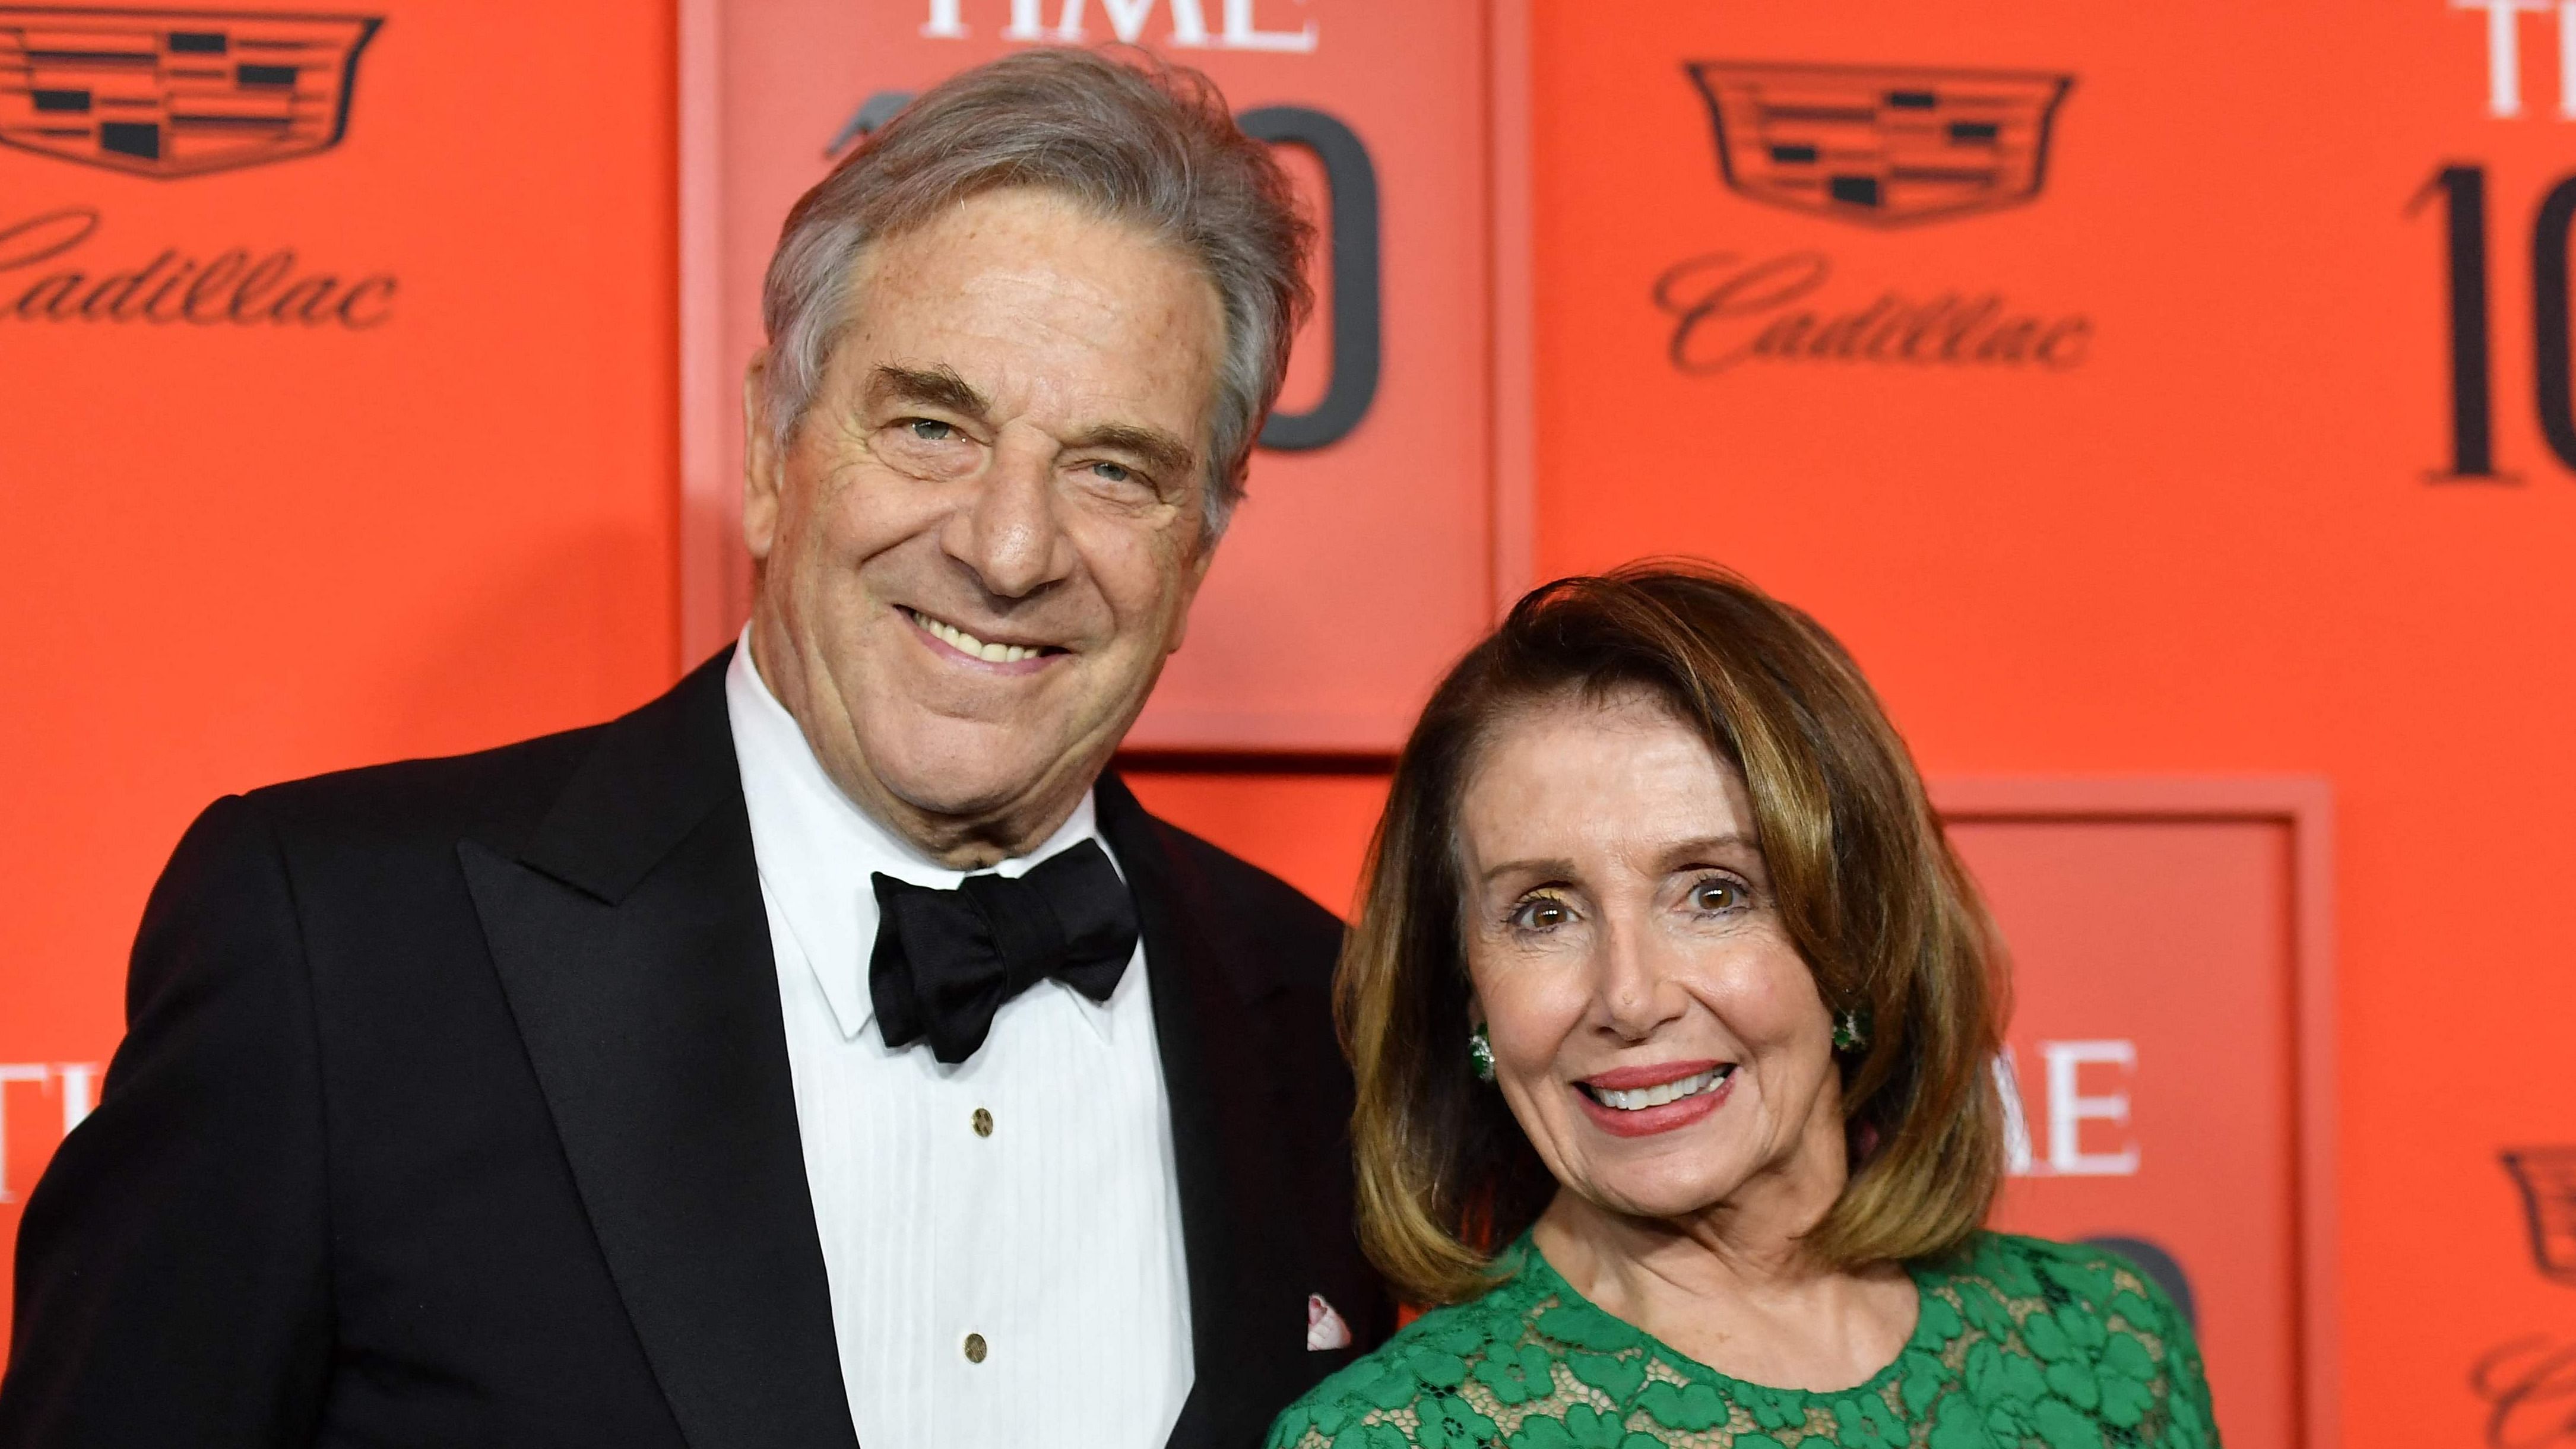 Paul Pelosi, 82 -- who underwent surgery and is recovering in hospital -- was at home alone, as his wife was working in Washington. Credit: AFP Photo